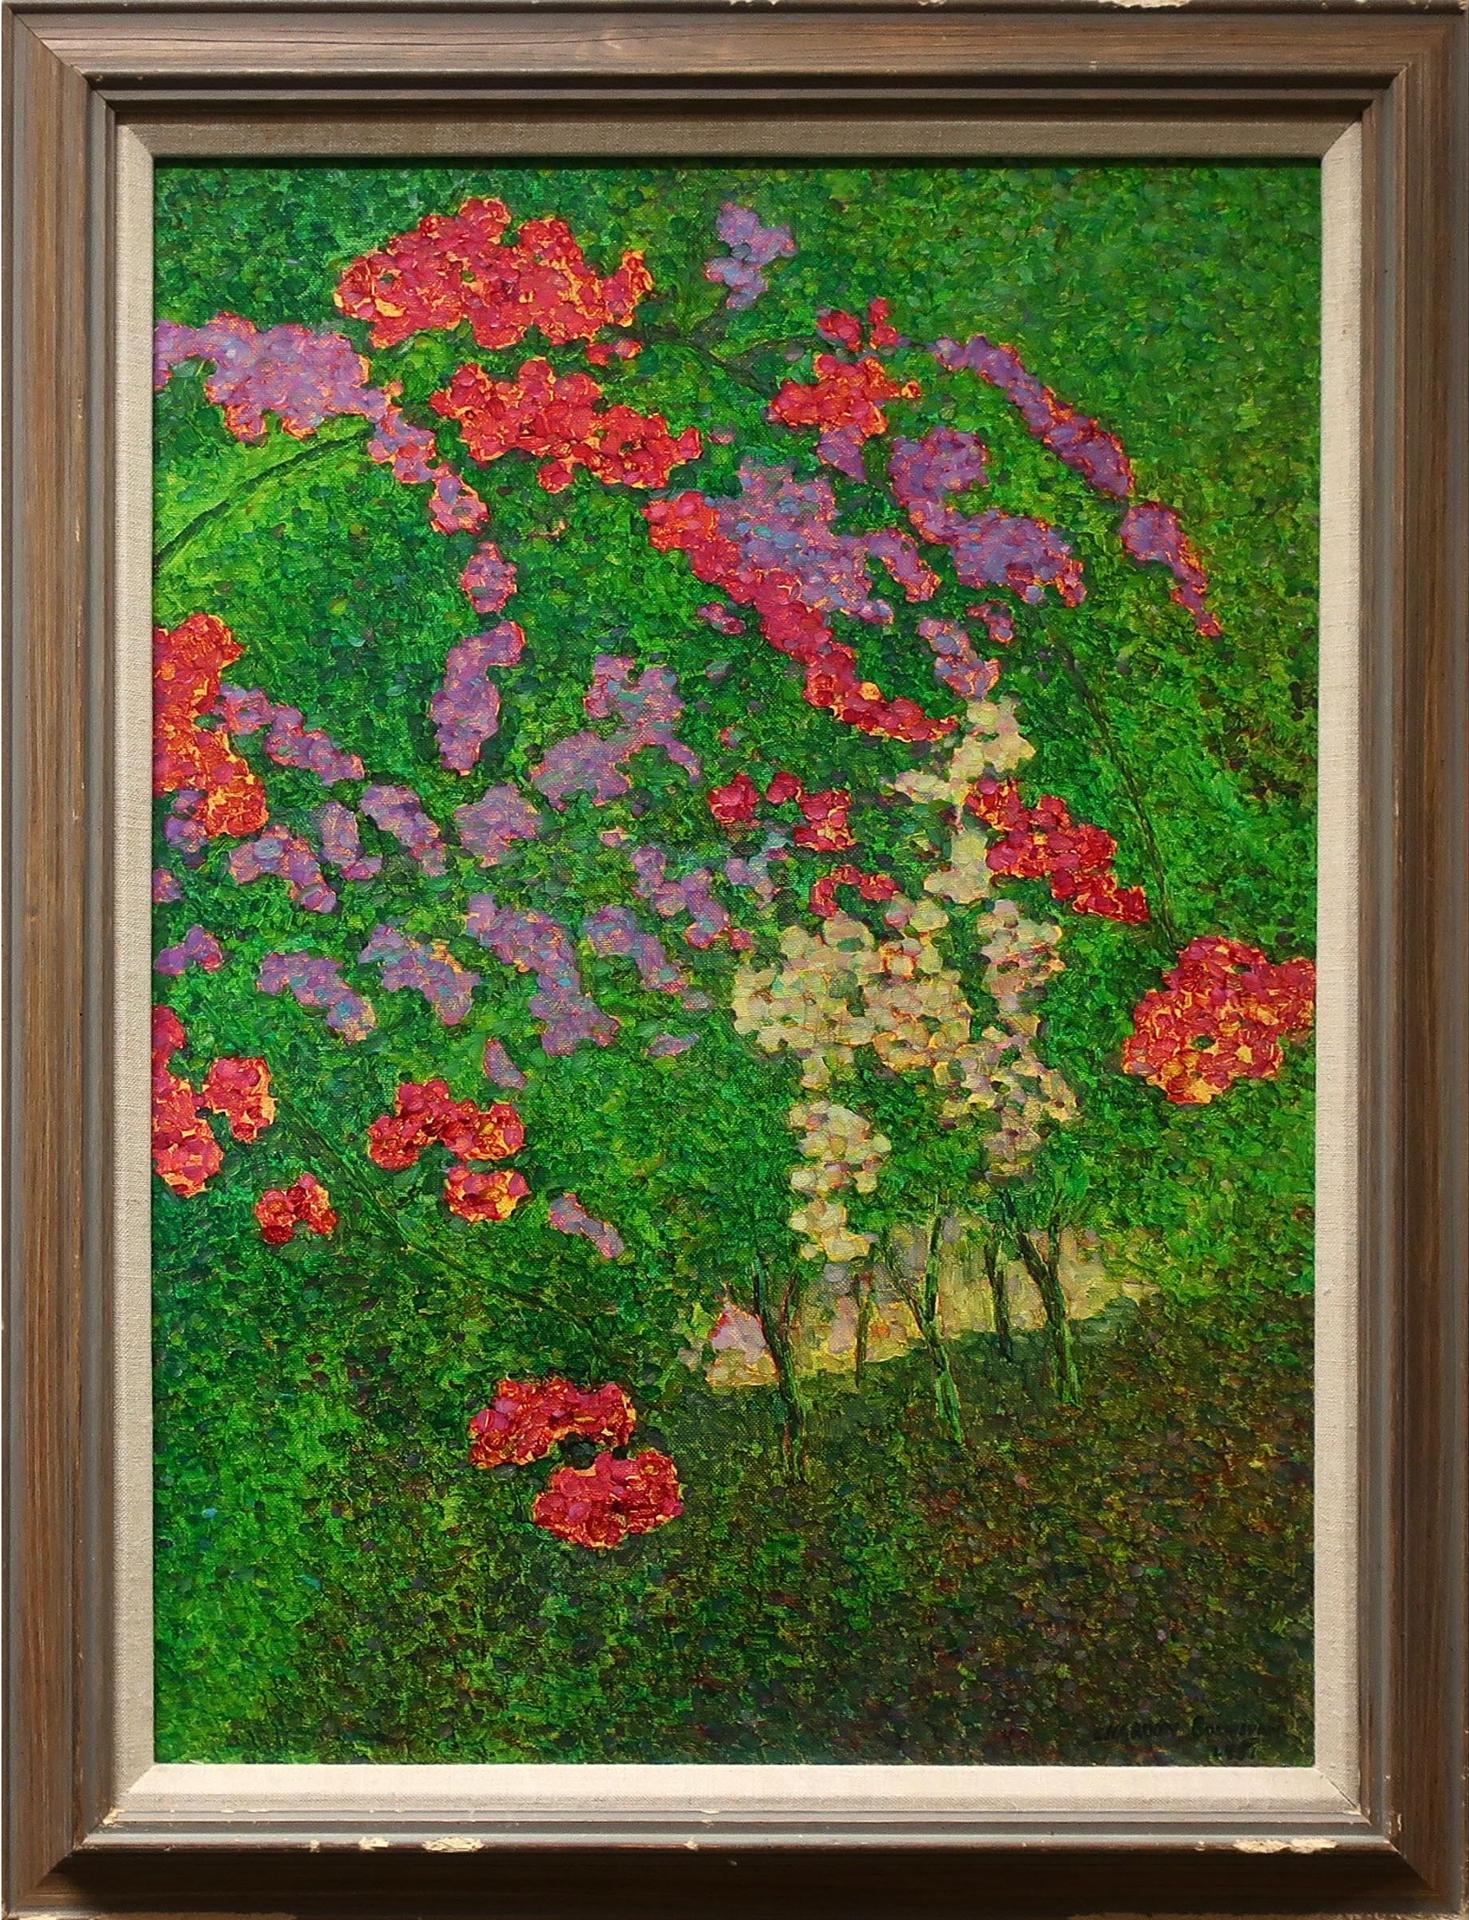 Charoon Boonsuan (1938) - Untitled (Springtime Blossoms)